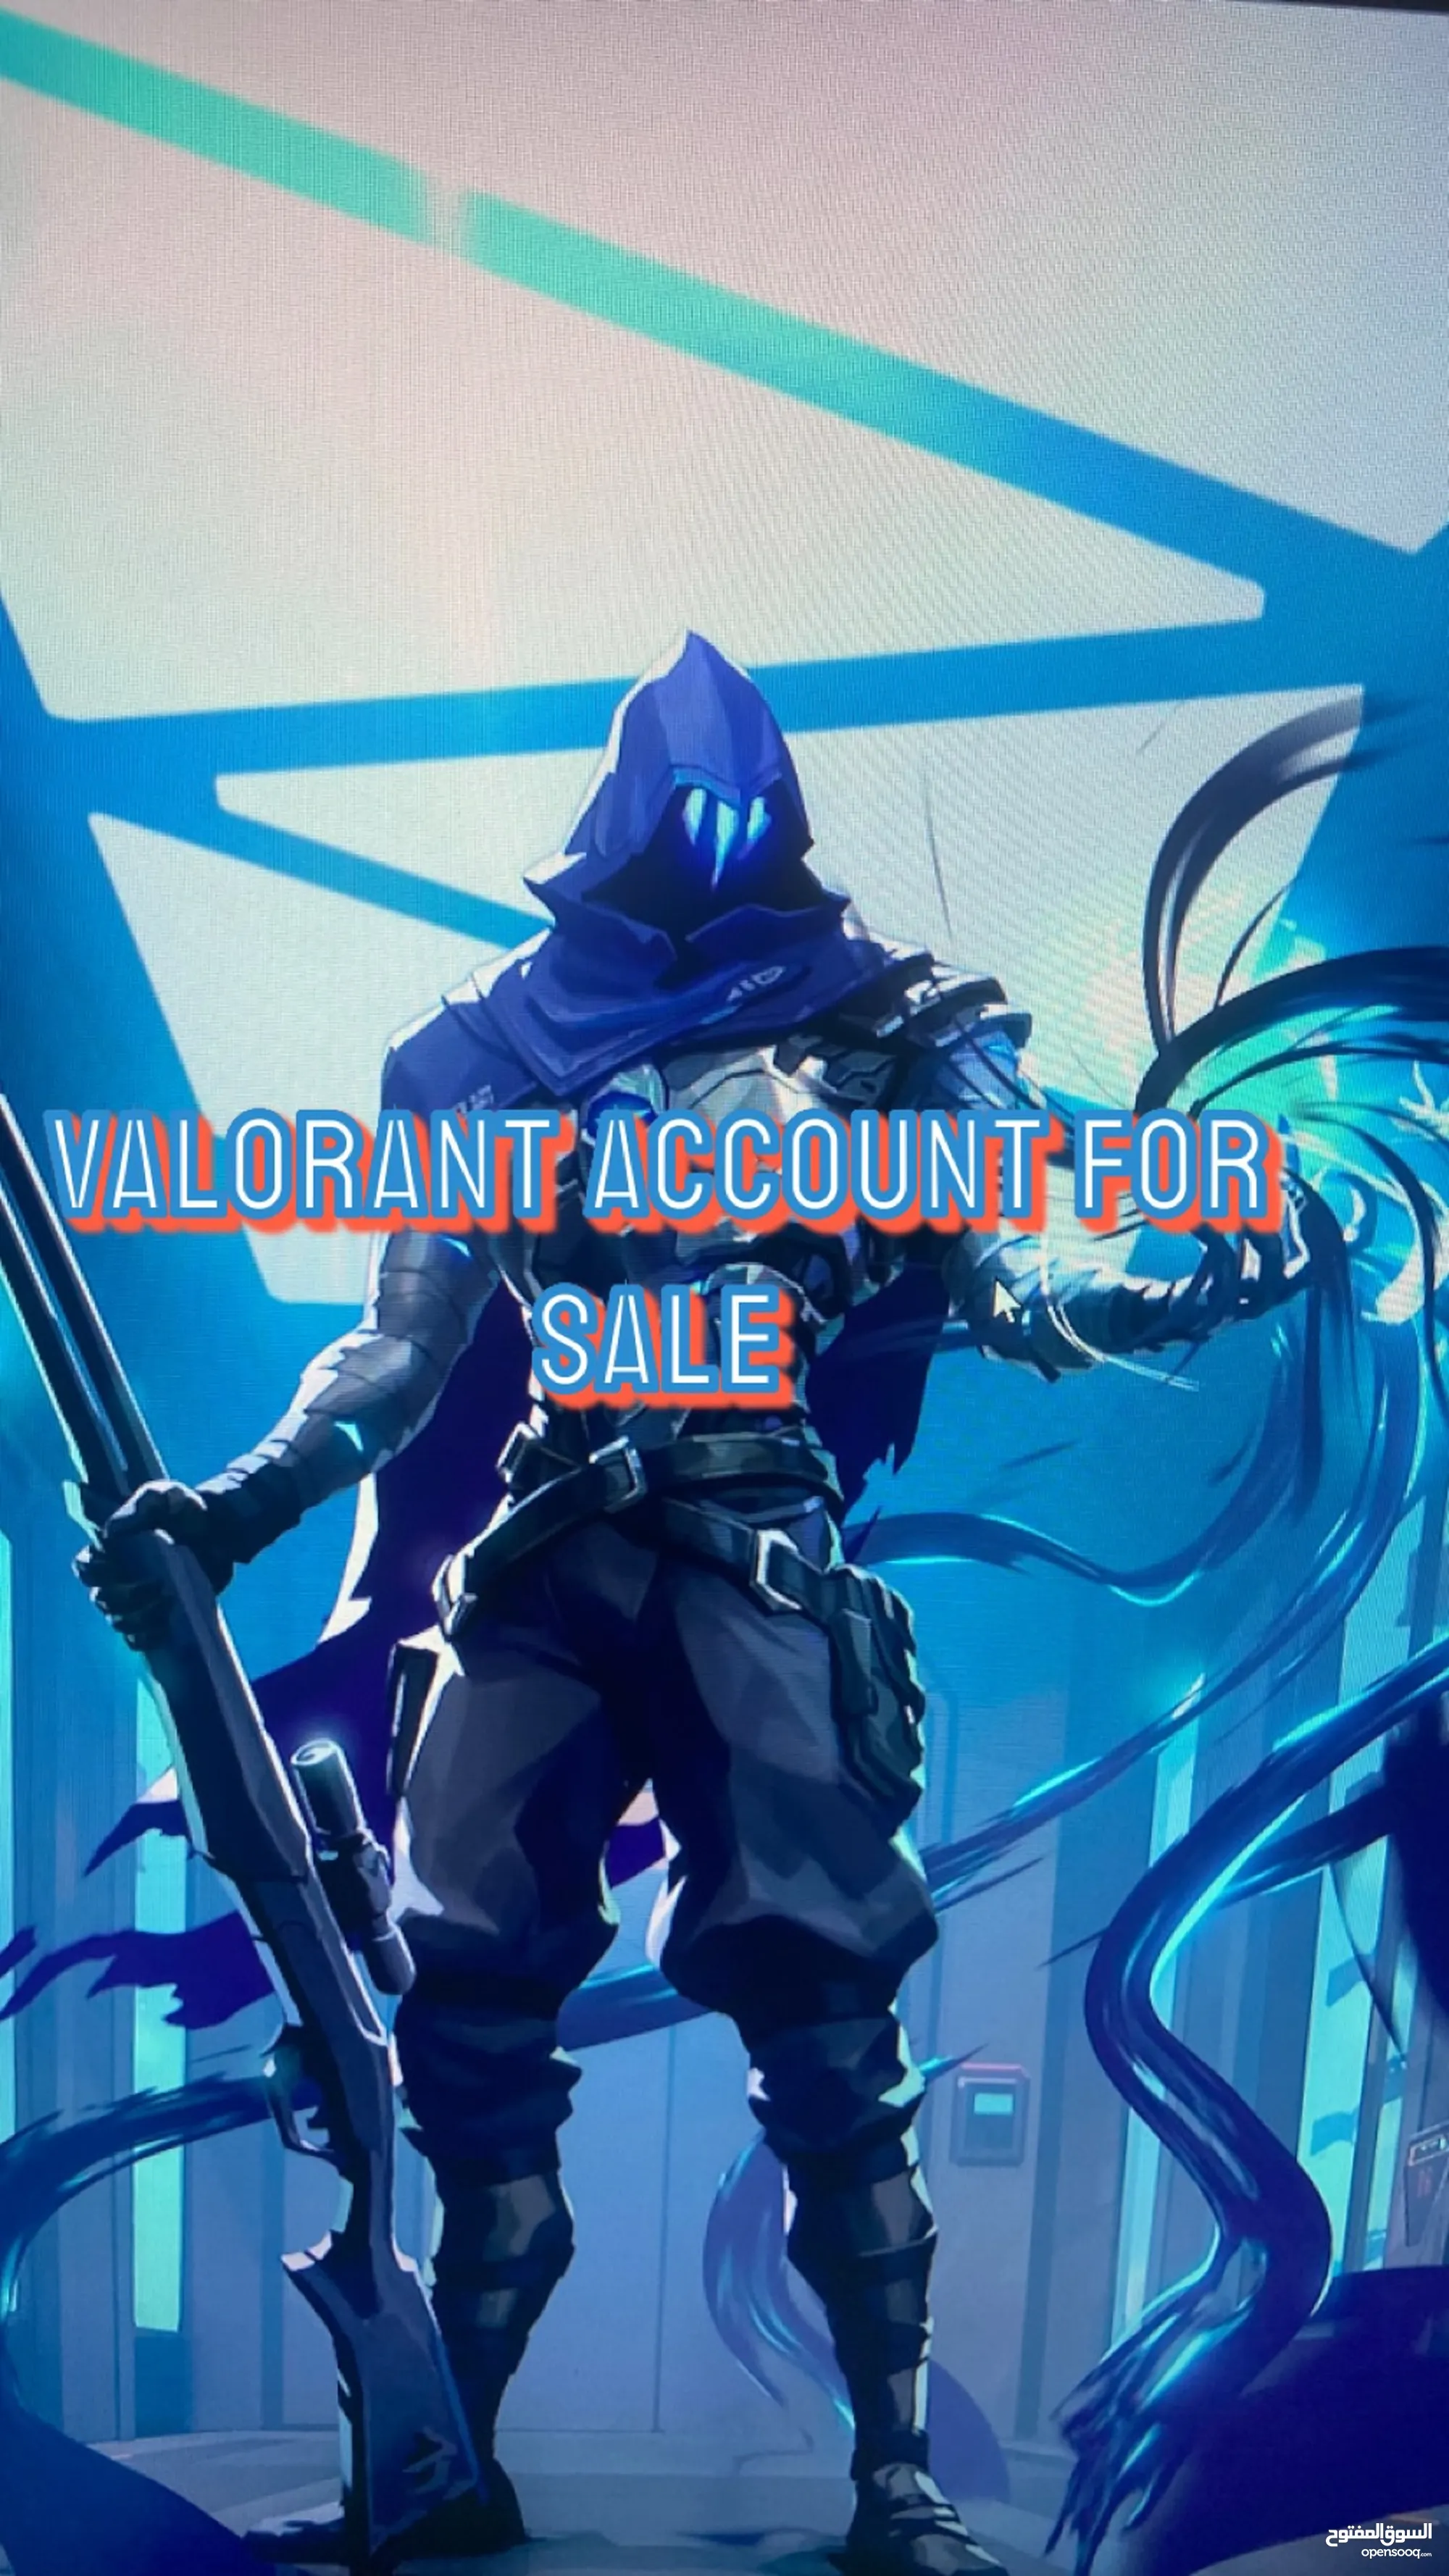 Valorant Account Unranked  Level 20+  Region: [ EU ] [EU]  Mail Change Unverif Email  Full Access FAST DELIVERY WARRANTY